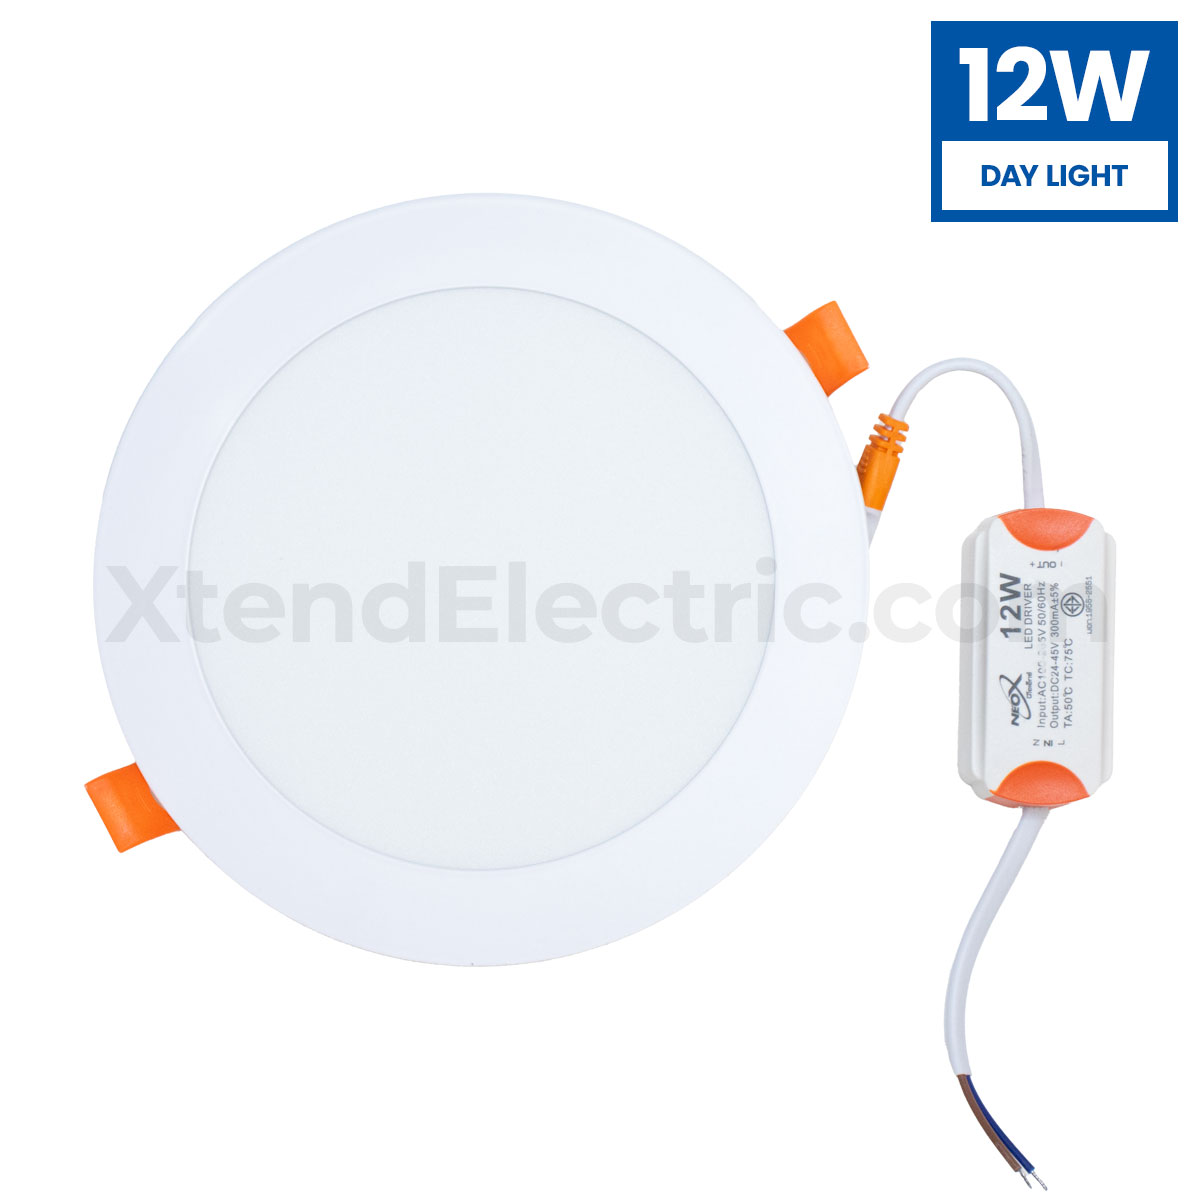 Neox-Downlight-CC-12w-DL-COVER1